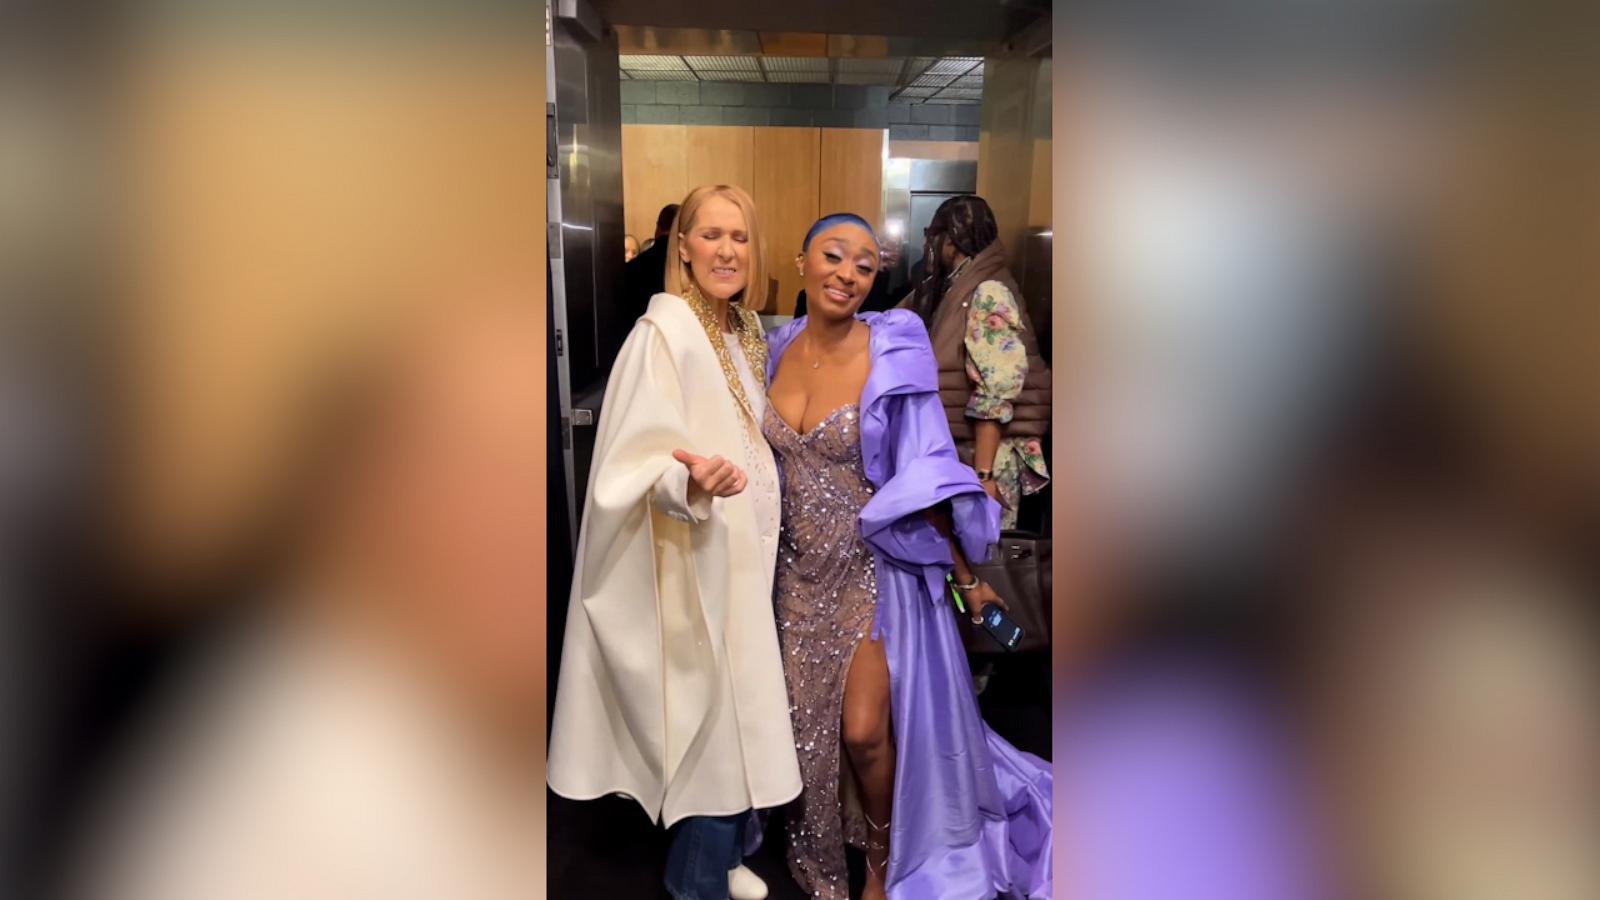 VIDEO: Watch this fun moment between Celine Dion and Sonyae Elise backstage at the Grammys